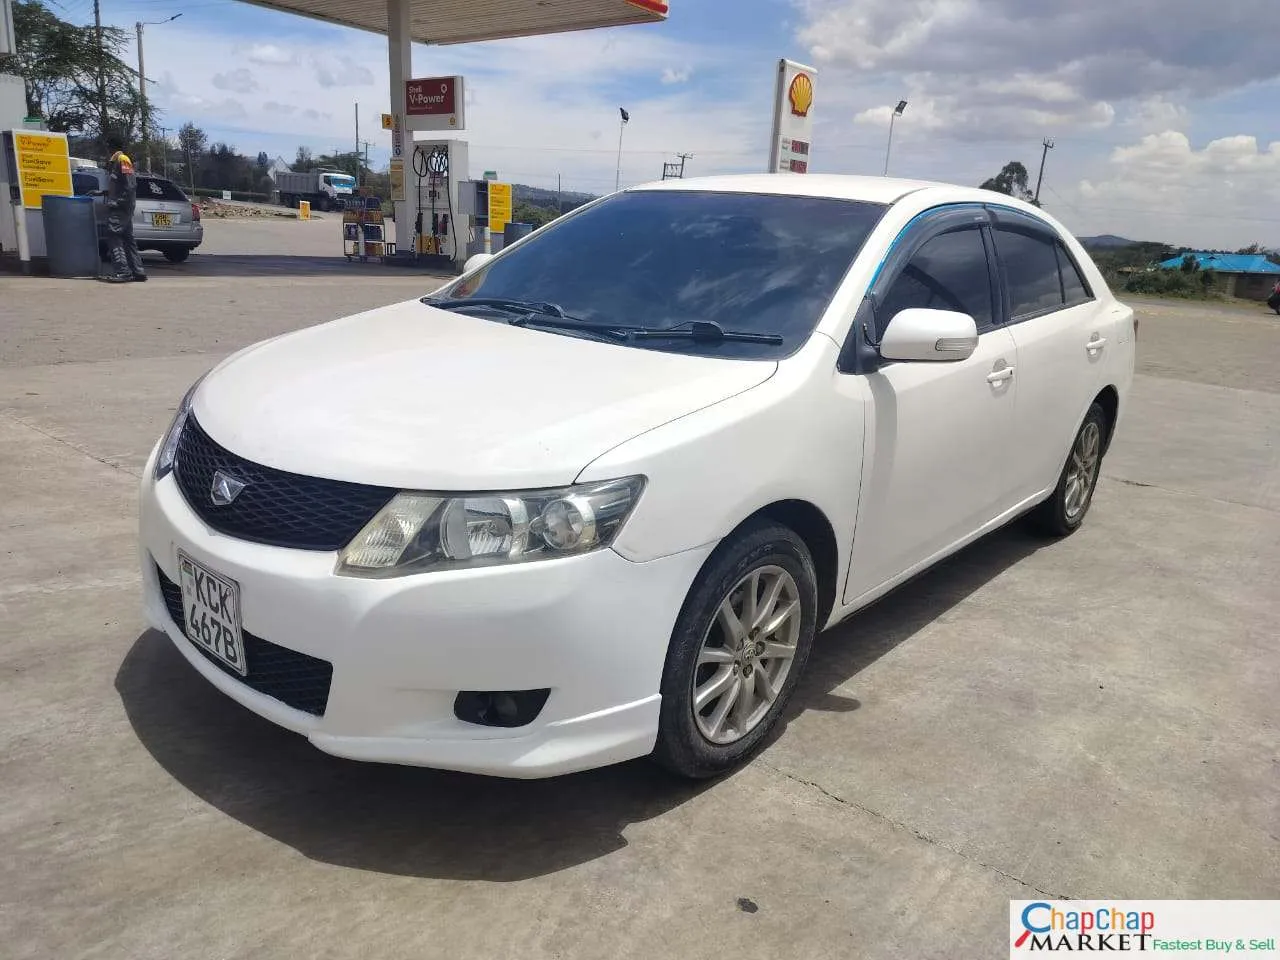 Toyota Allion kenya You Pay 30% Deposit Toyota allion for sale in kenya hire purchase INSTALLMENTS Trade in OK EXCLUSIVE